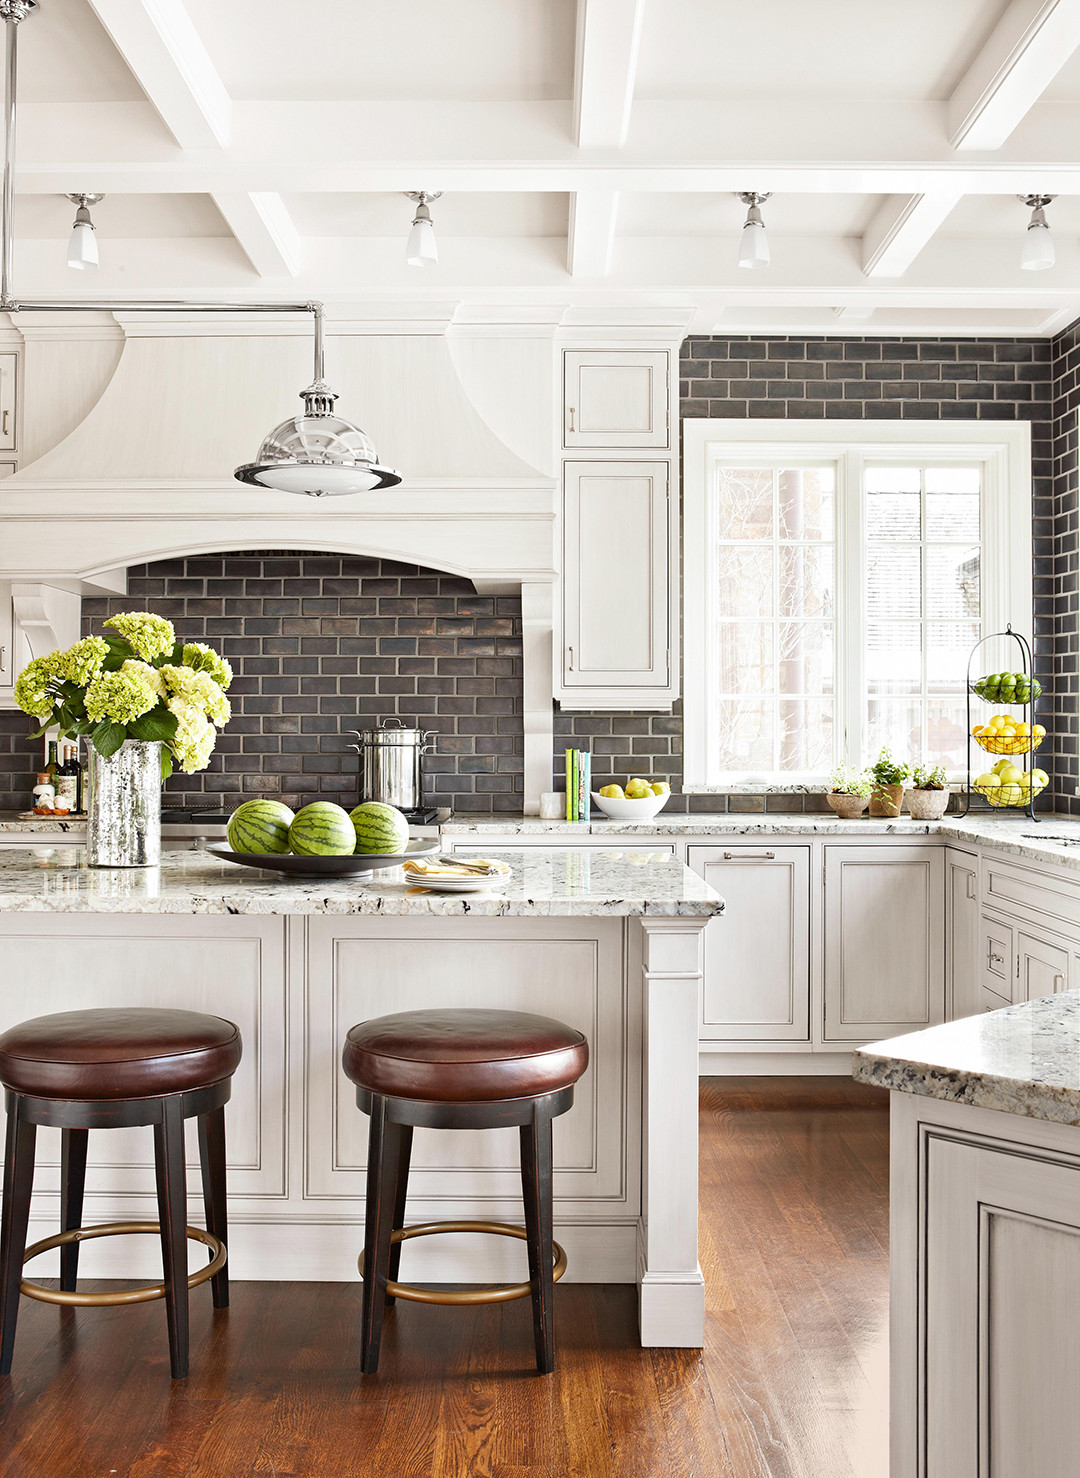 Kitchen Backsplash Trends To Avoid
 Kitchen Trends that are Here to Stay